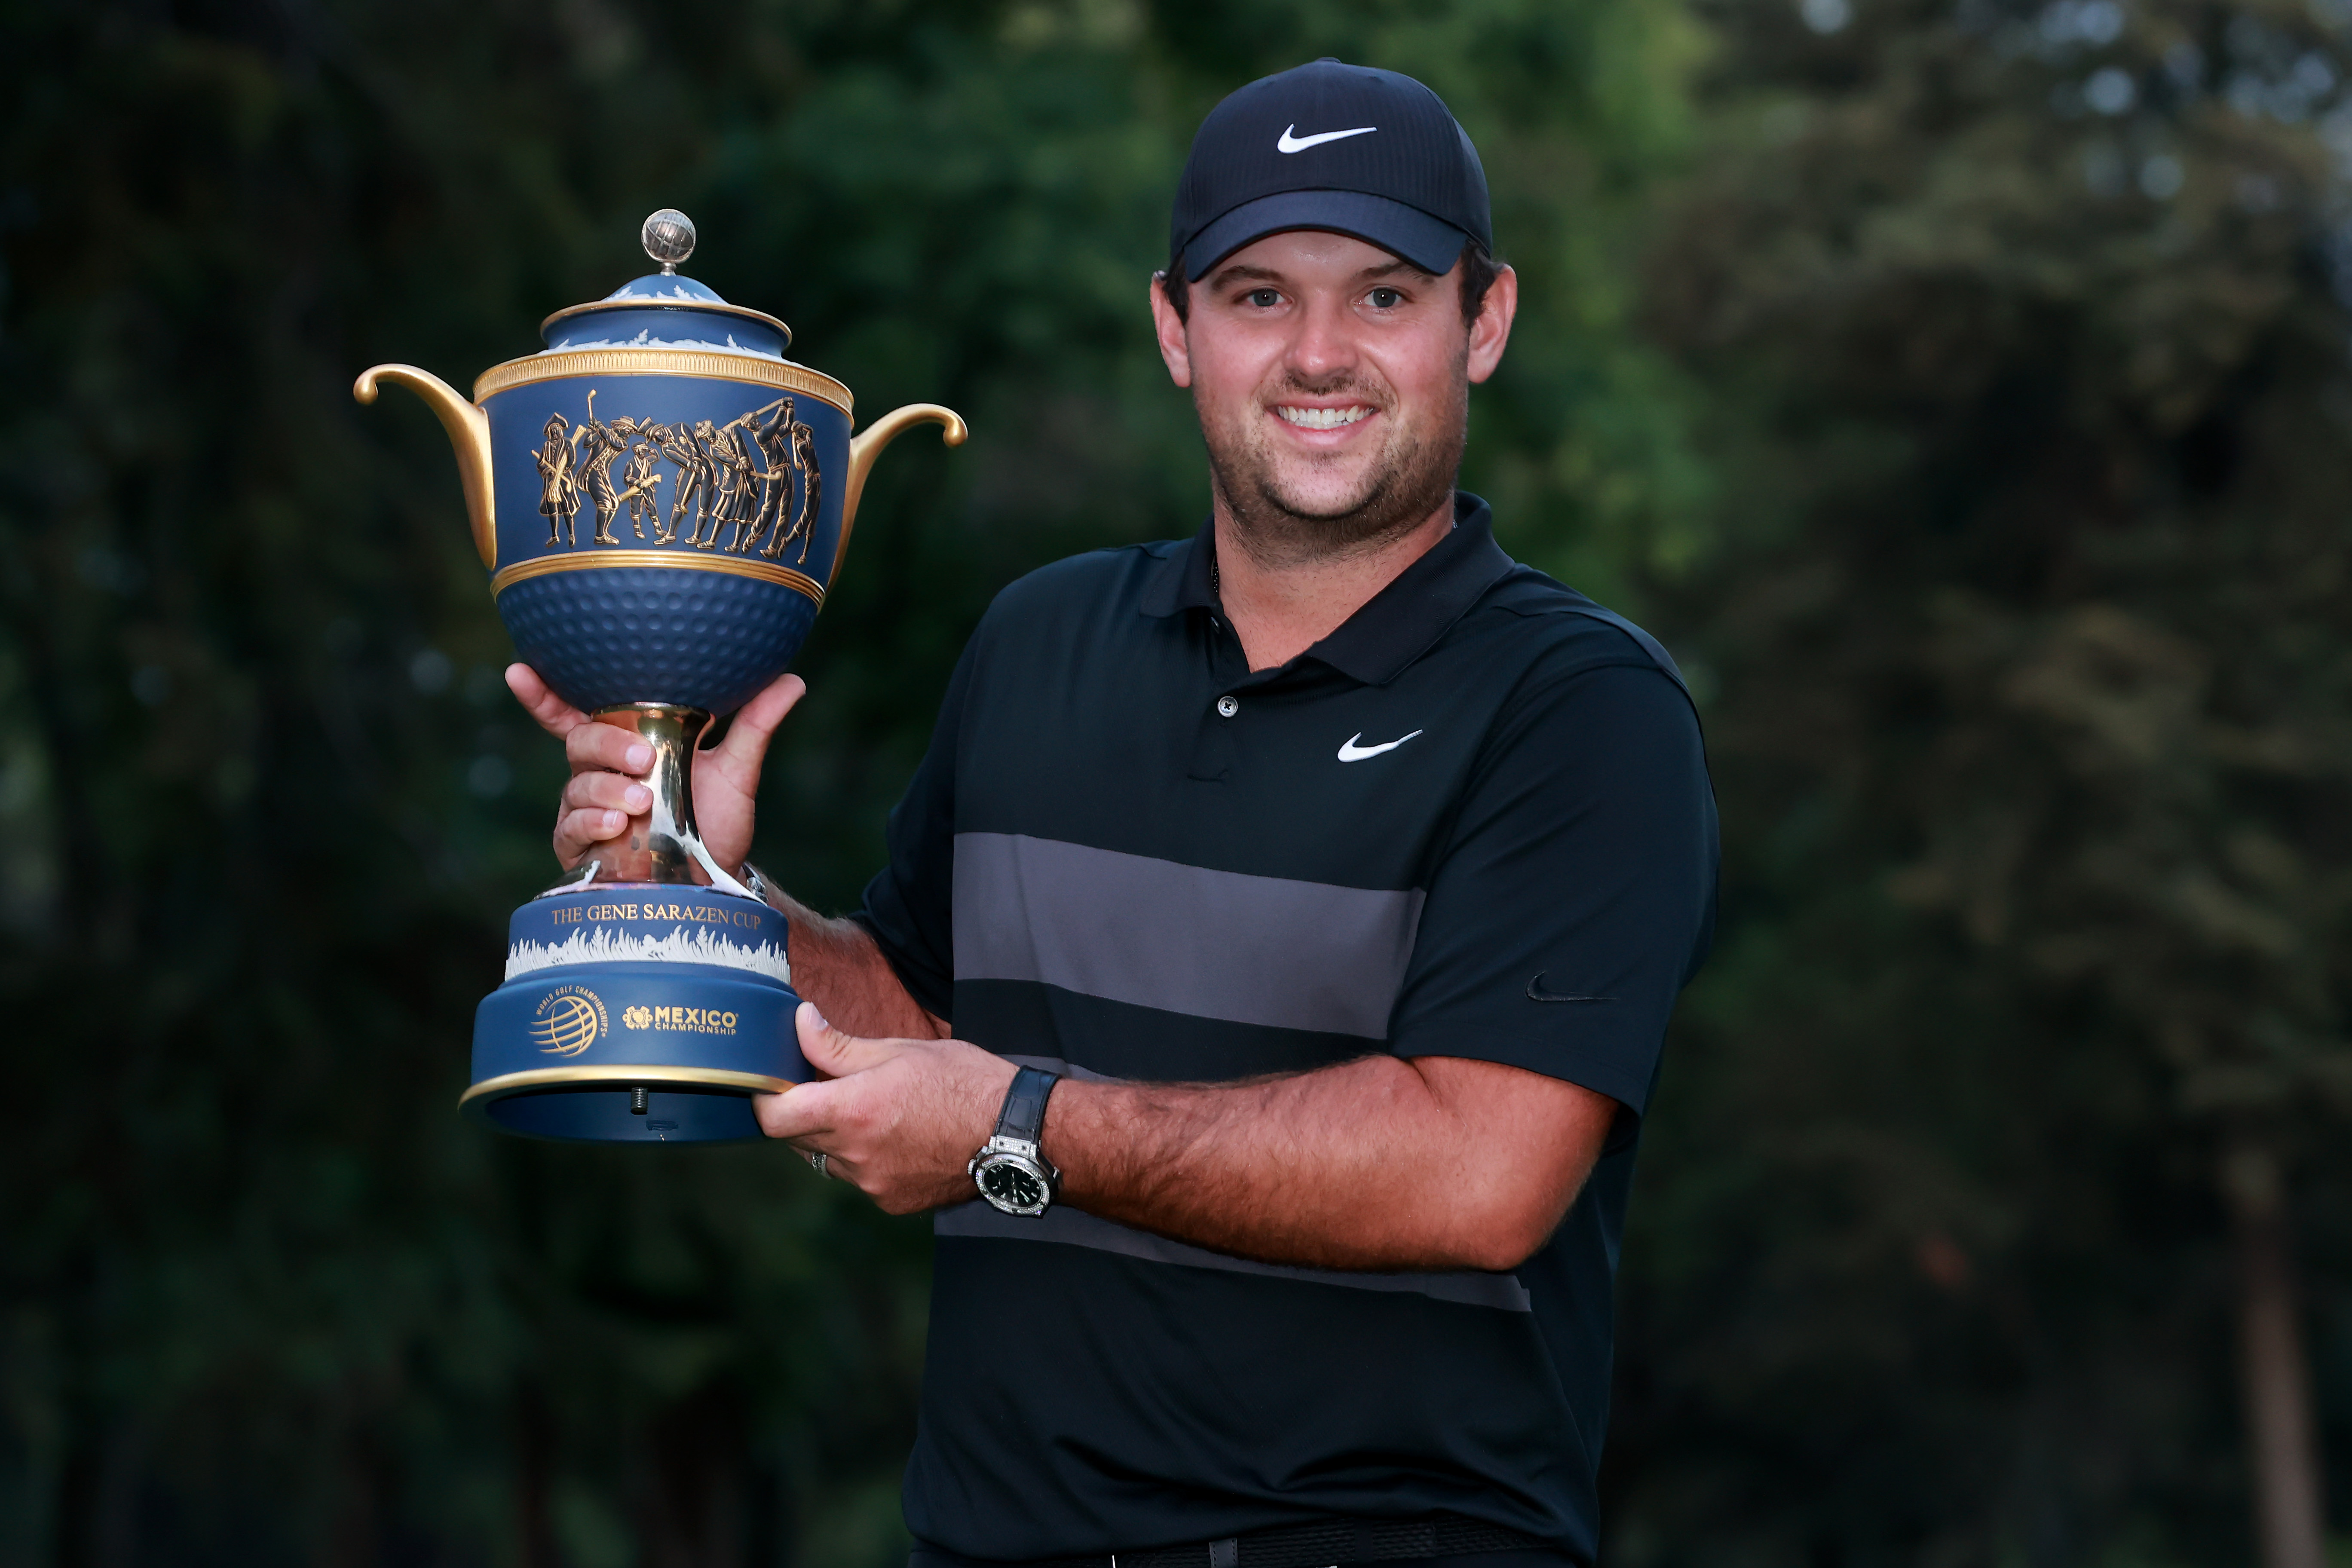 Patrick Reed winner of the 2020 WGC-Mexico Championship